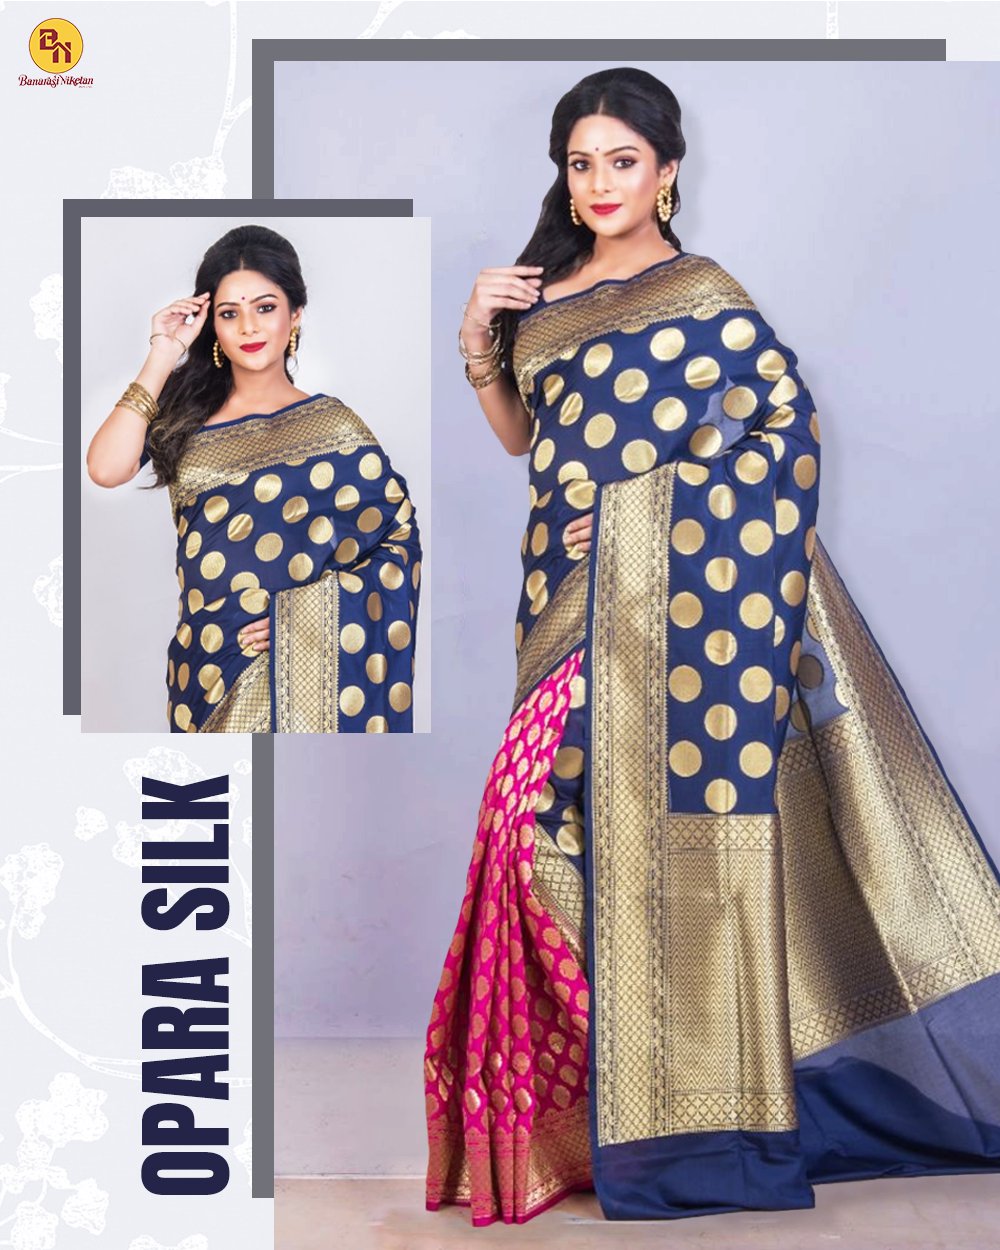 Pothys Boutique - The more the merrier! Fill your bridal trousseau with a  varied range of traditional and contemporary designs. Here are two gorgeous  picks designed with traditional colour combinations and motifs